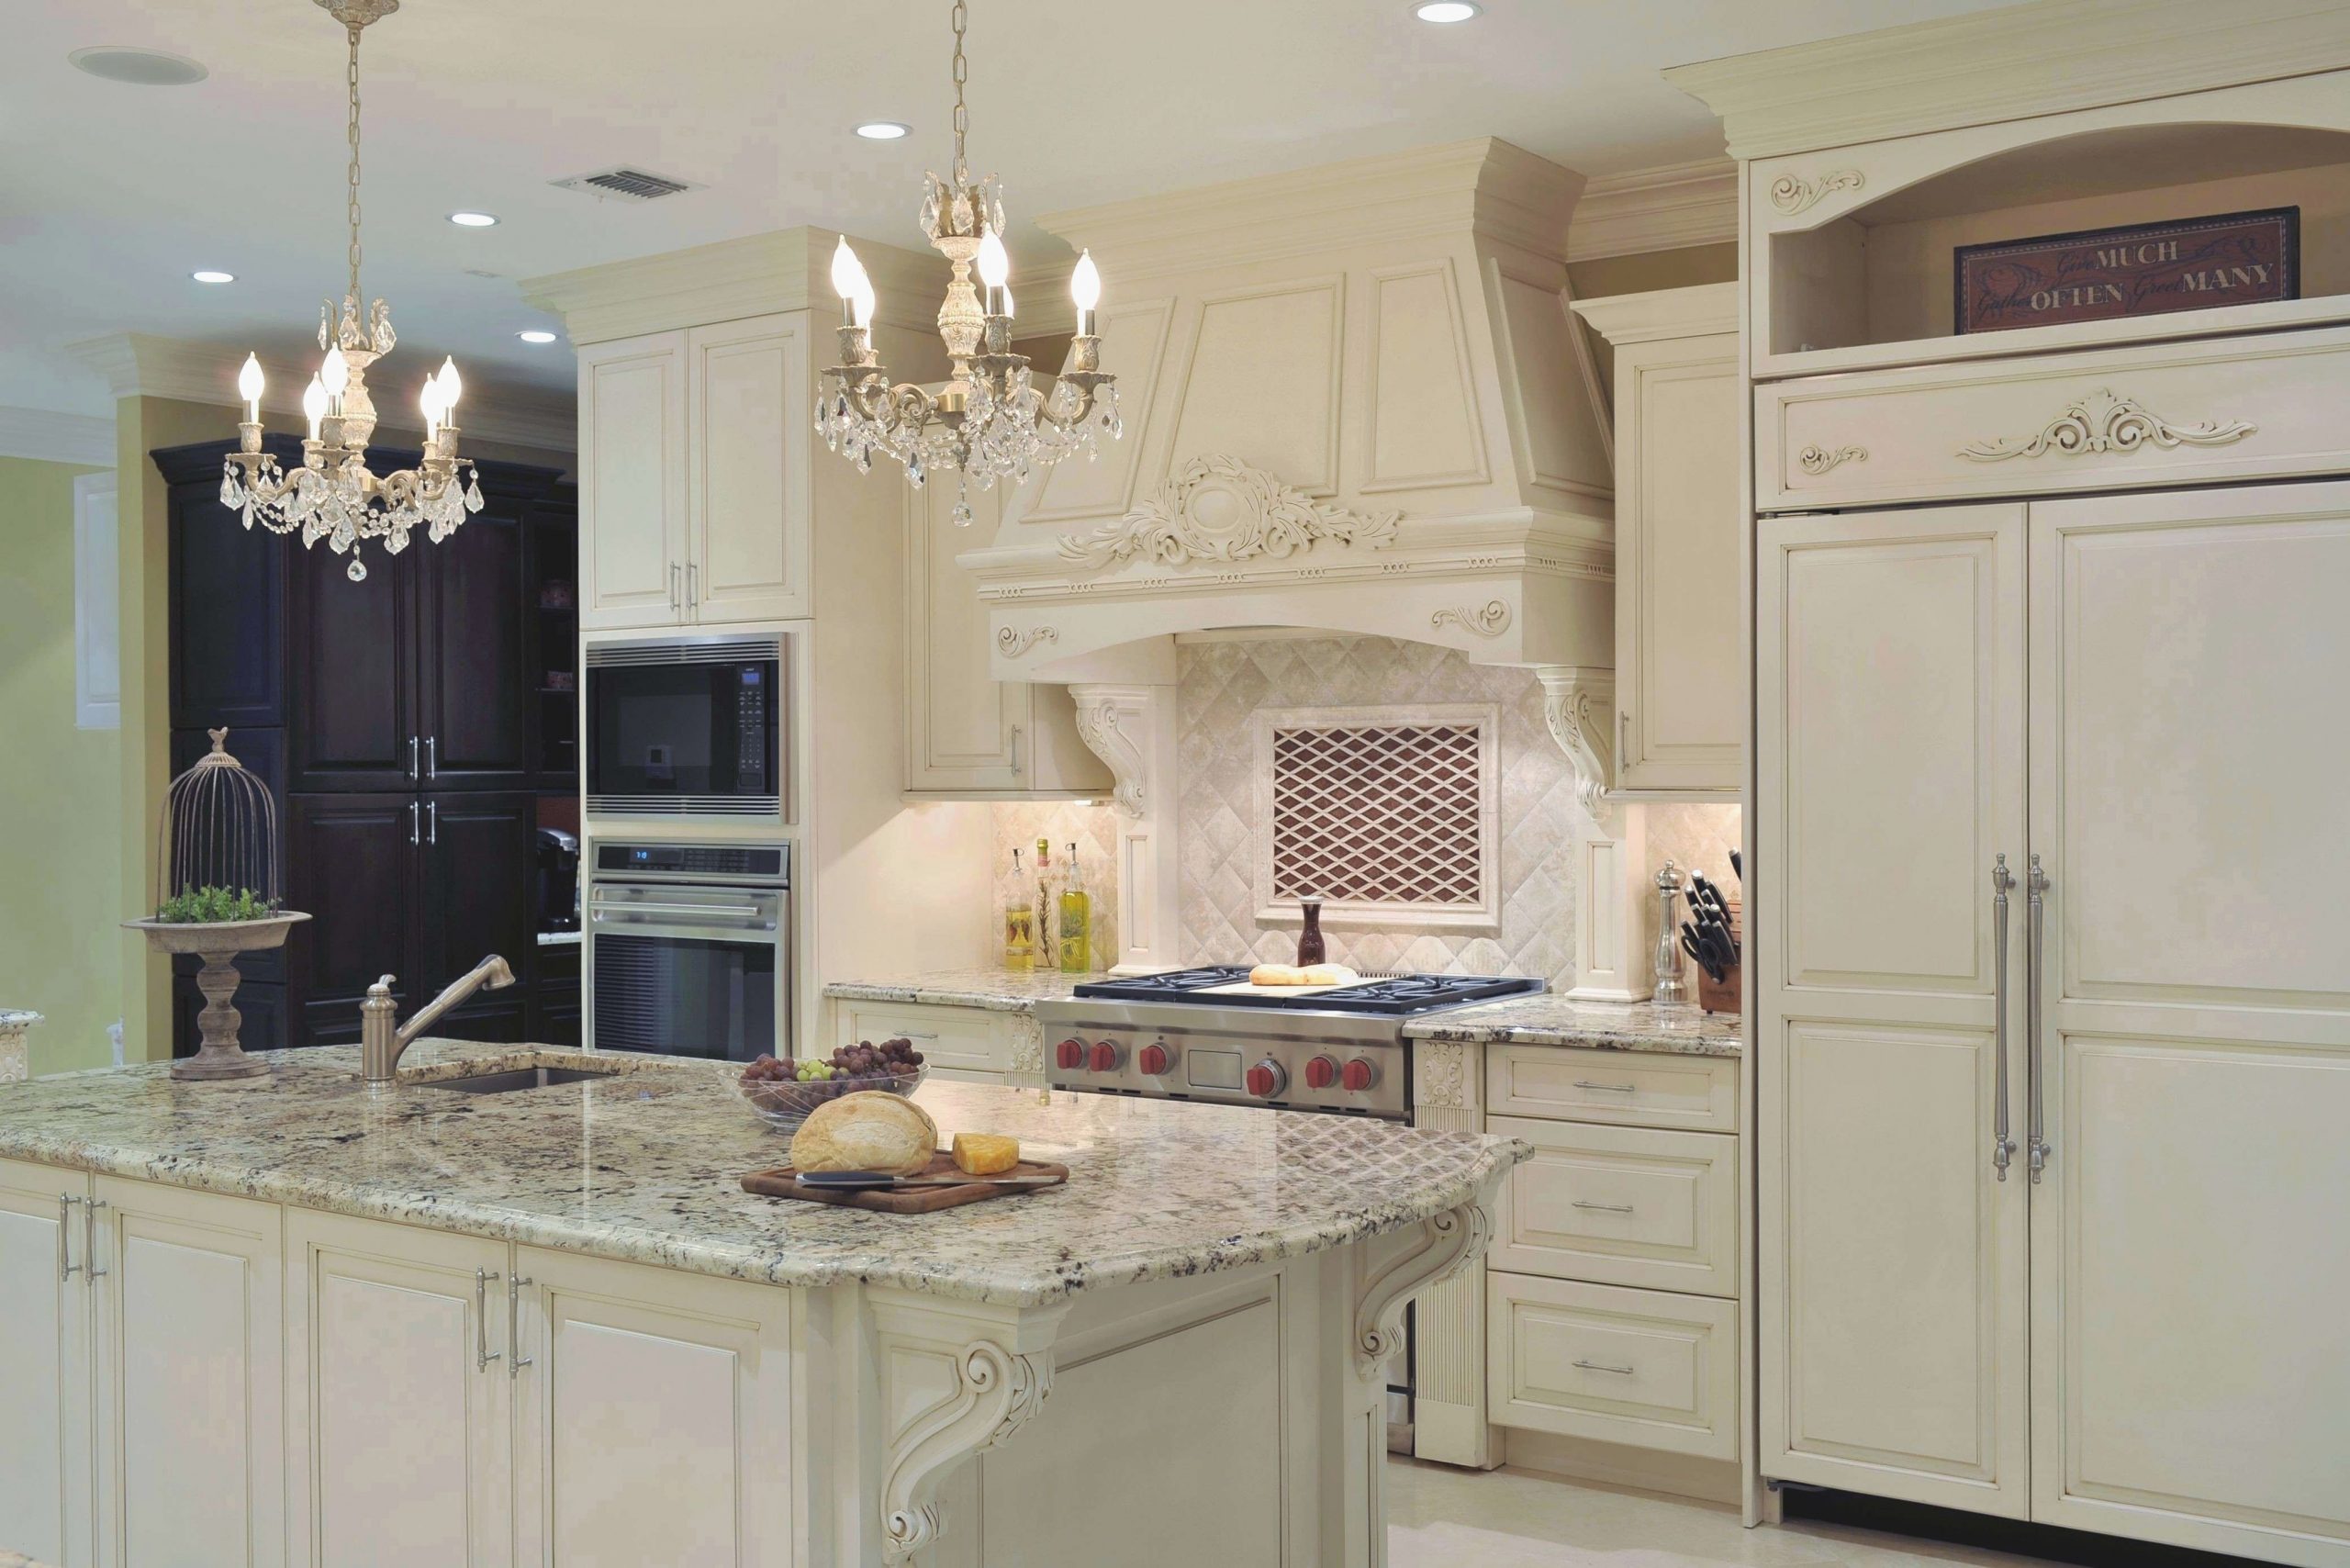 Where To Buy Affordable Kitchen Cabinets